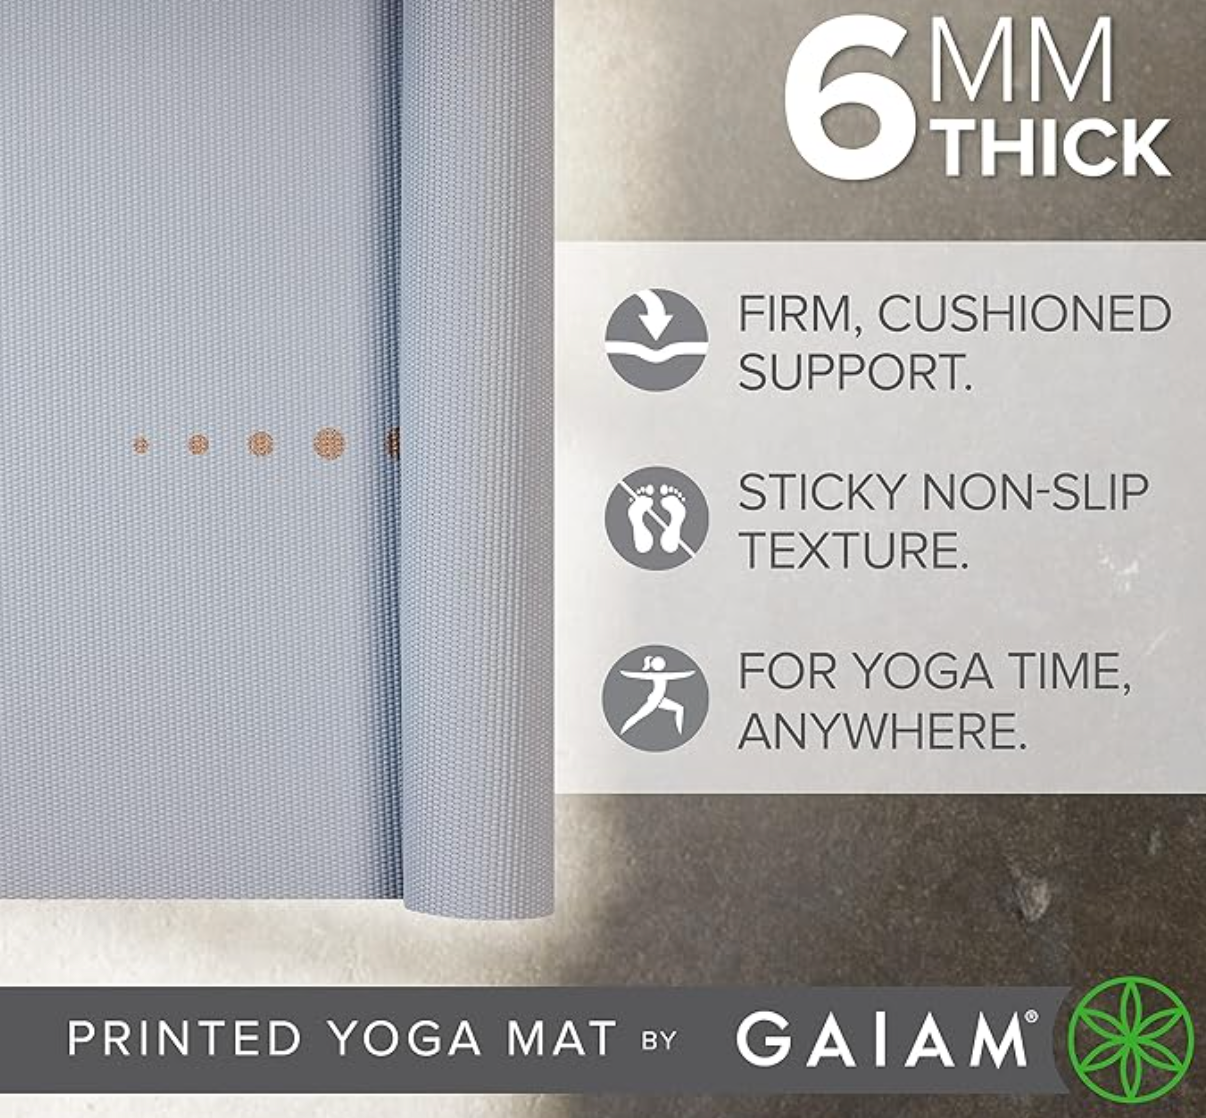 Gaiam Yoga Mat - Premium 6mm Print Extra Thick Non Slip Exercise & Fitness Mat for All Types of Yoga and Floor Workouts